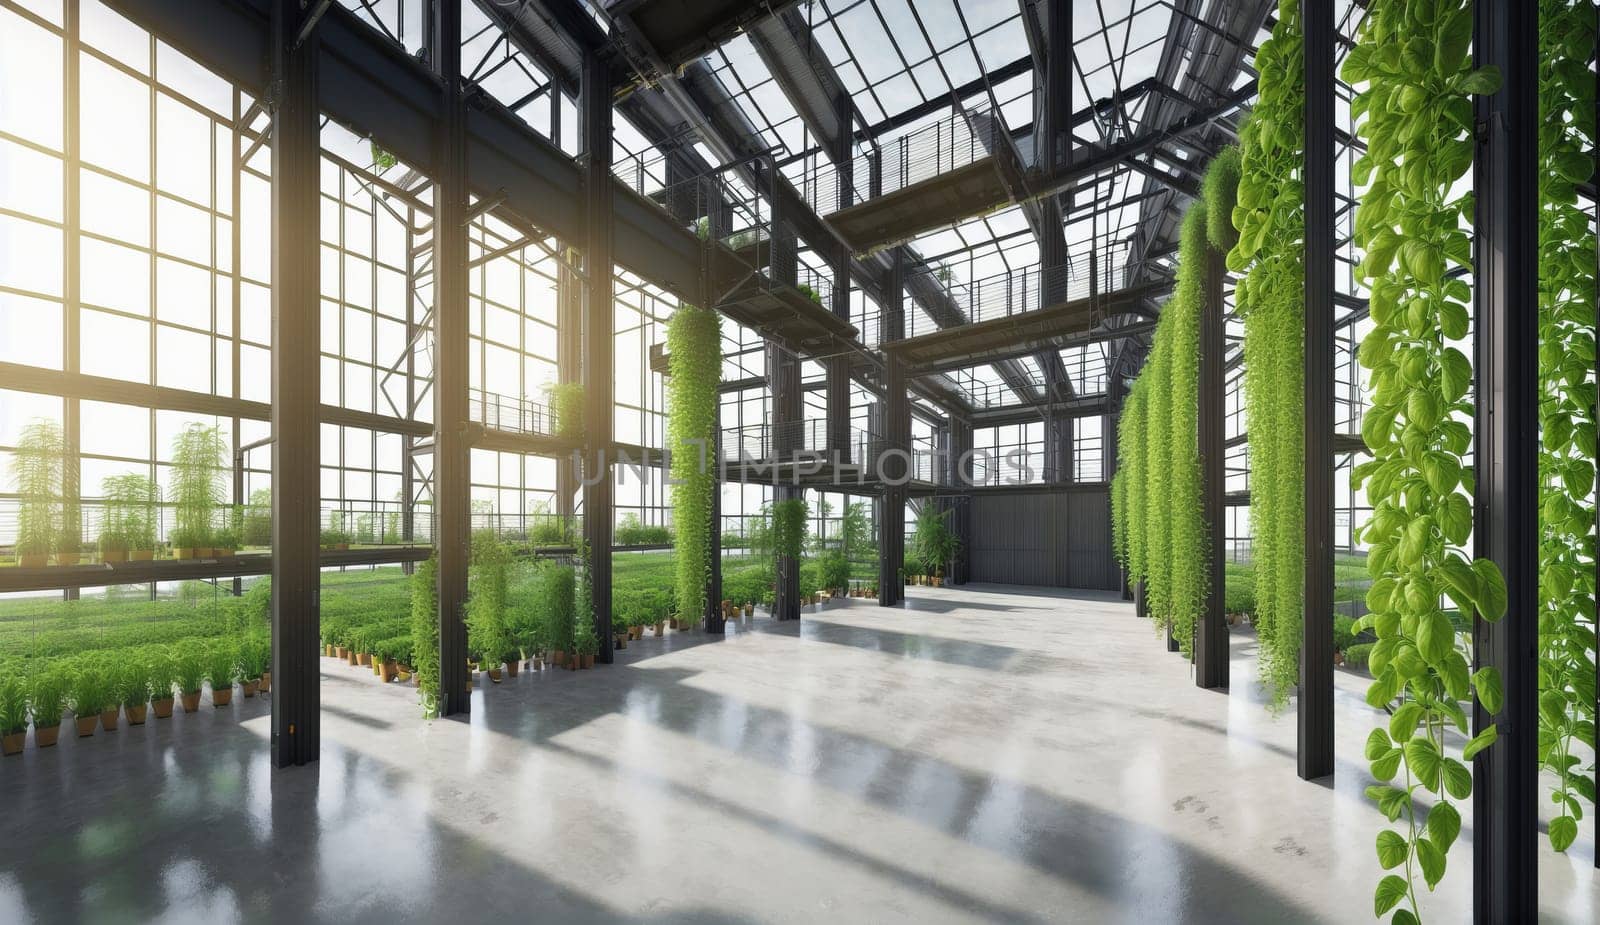 Spacious building interior with numerous windows allowing natural light in, adorned with plants growing on the walls. A perfect real estate opportunity with a unique fixture